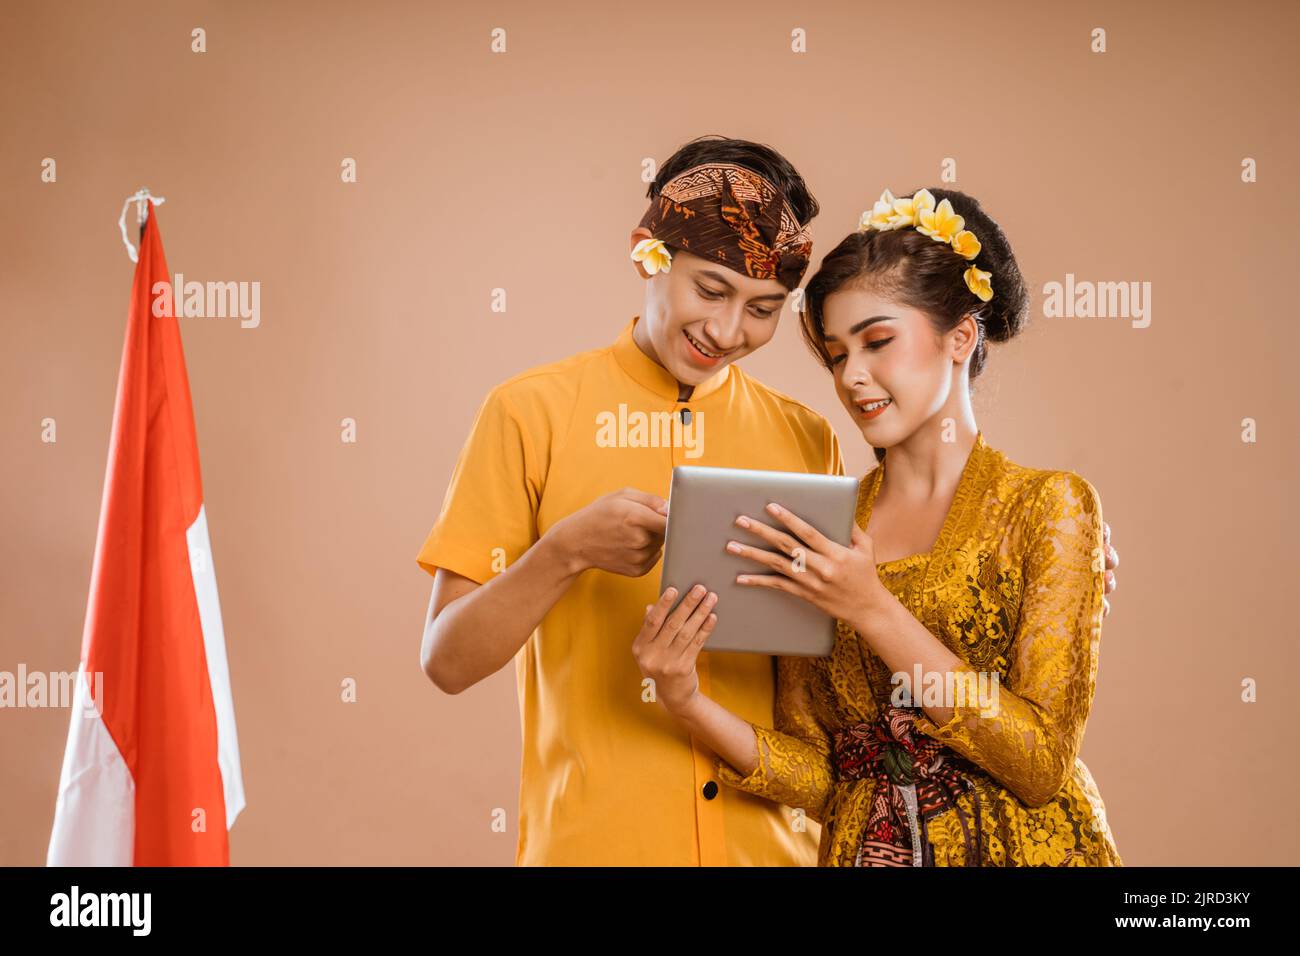 man and woman wearing balinese traditional clothing using tablet Stock Photo